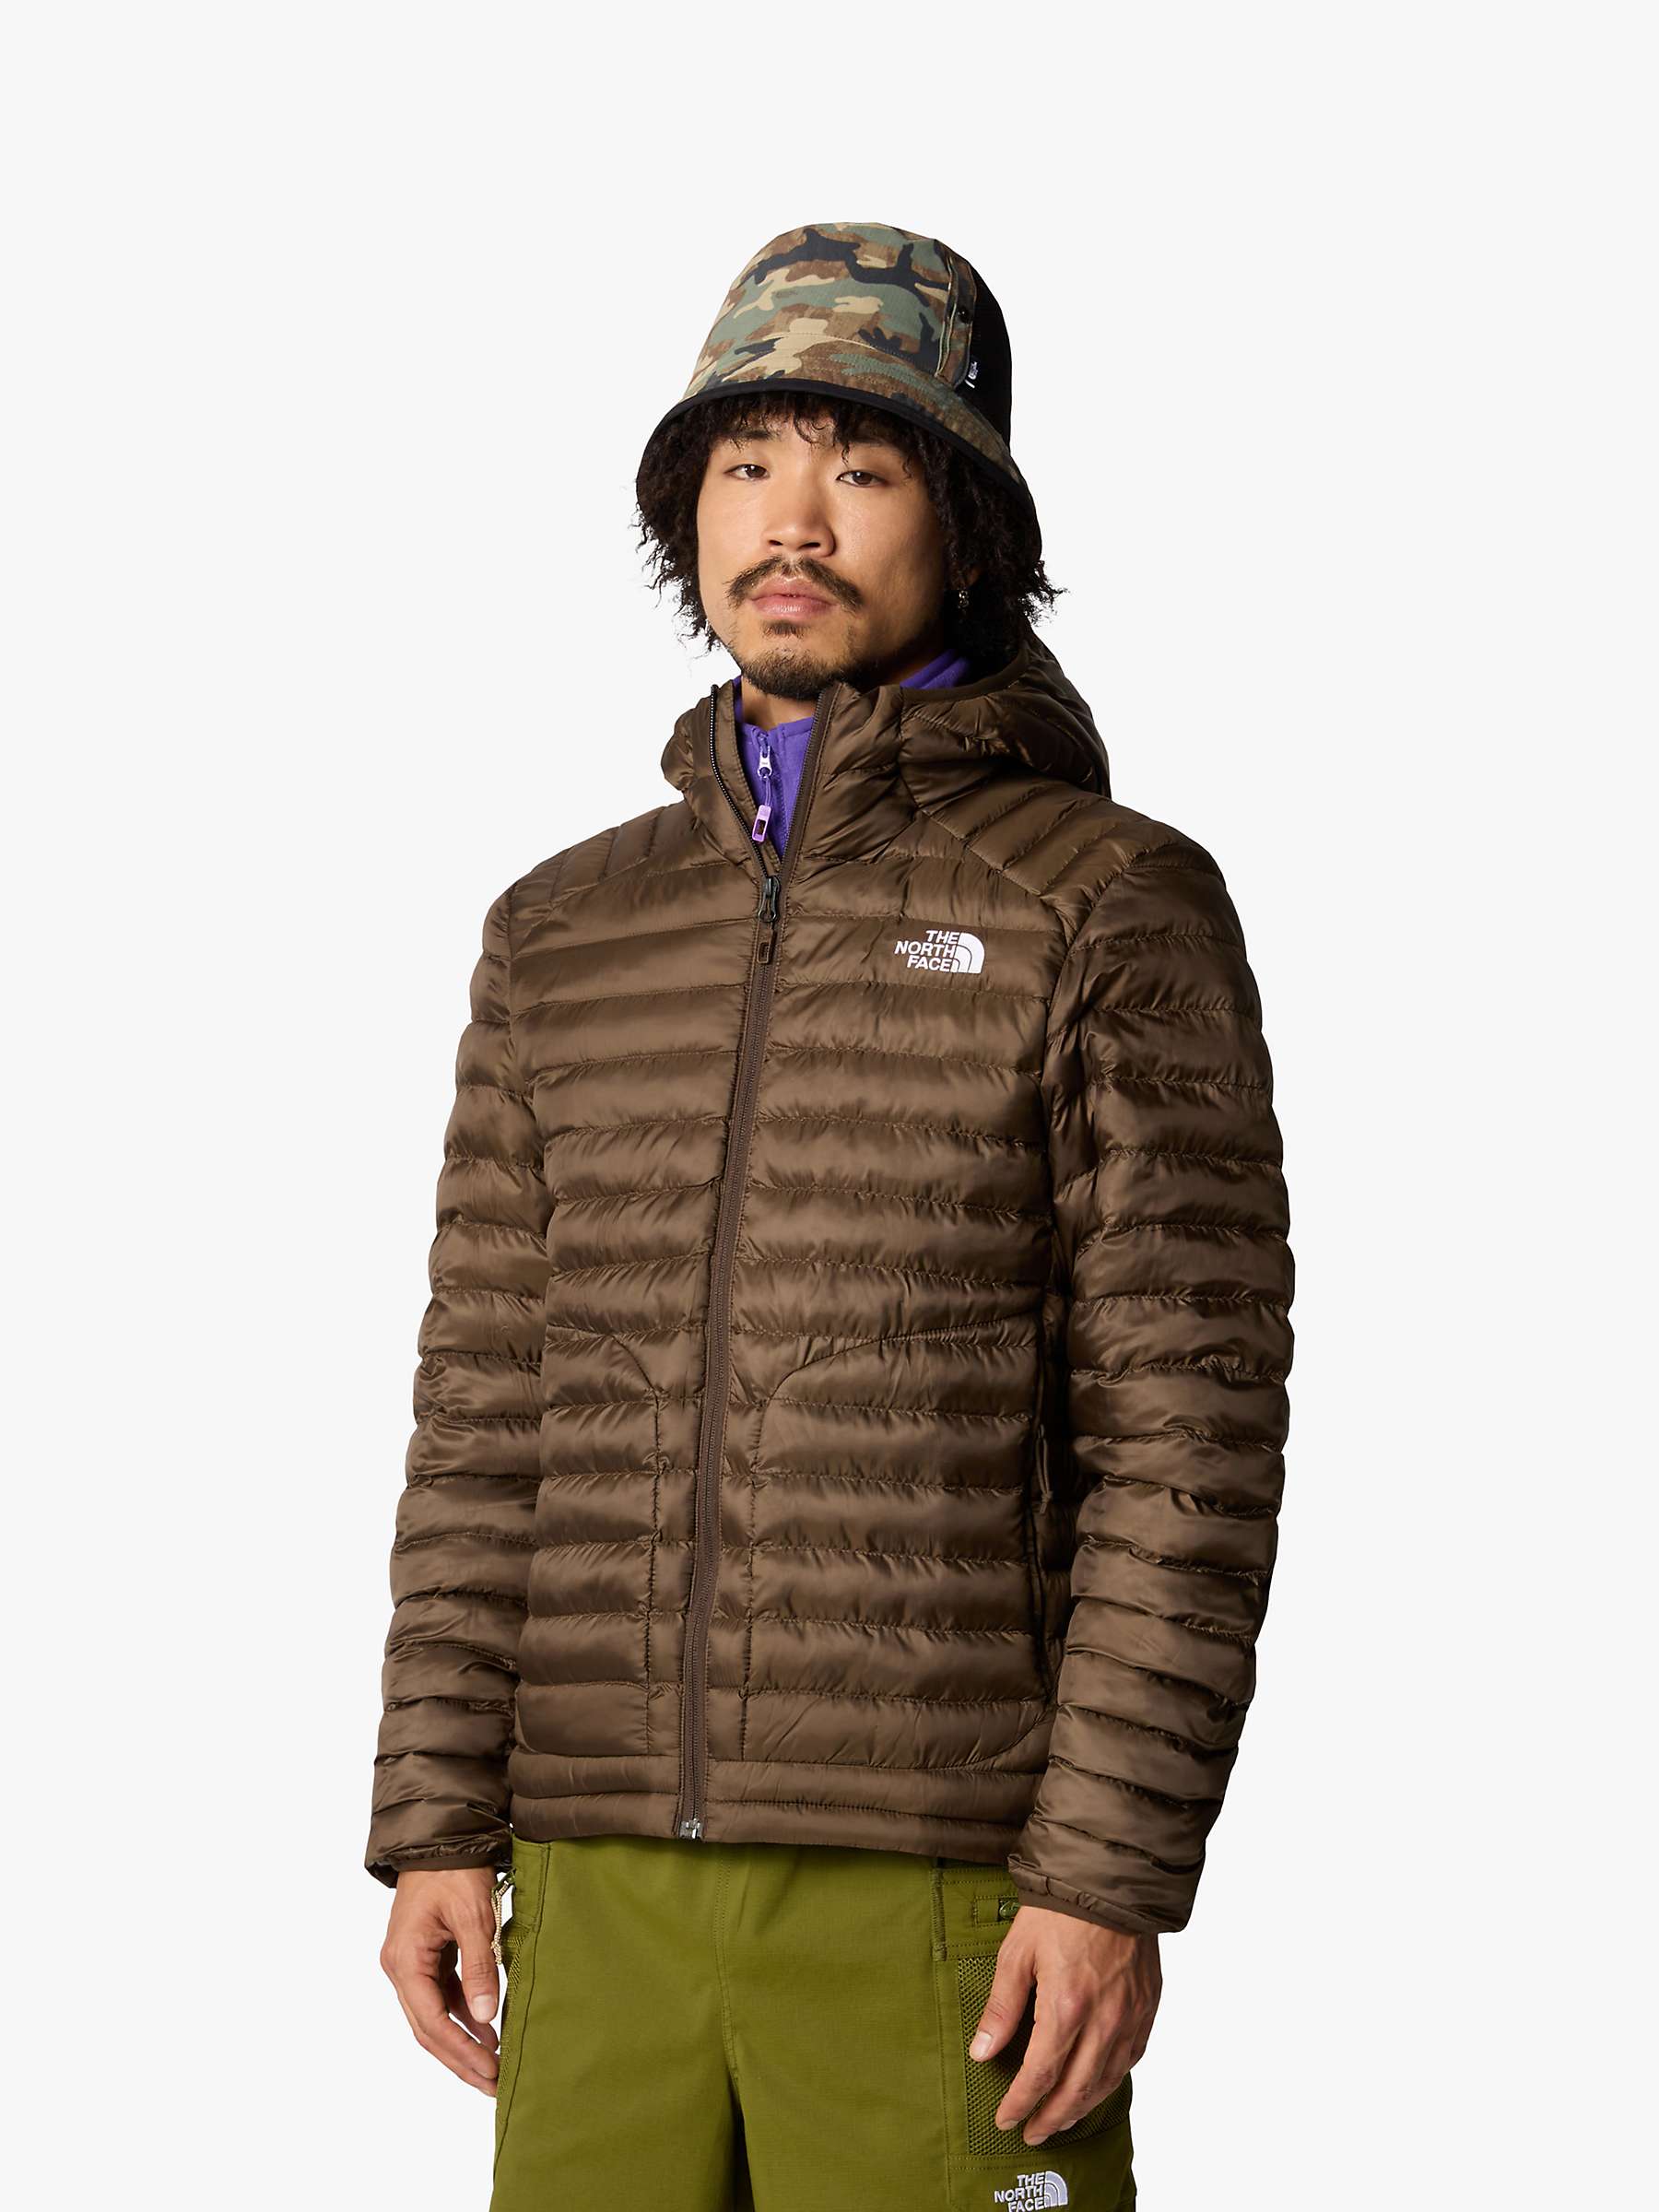 Buy The North Face Hula Hooded Jacket, Brown Online at johnlewis.com